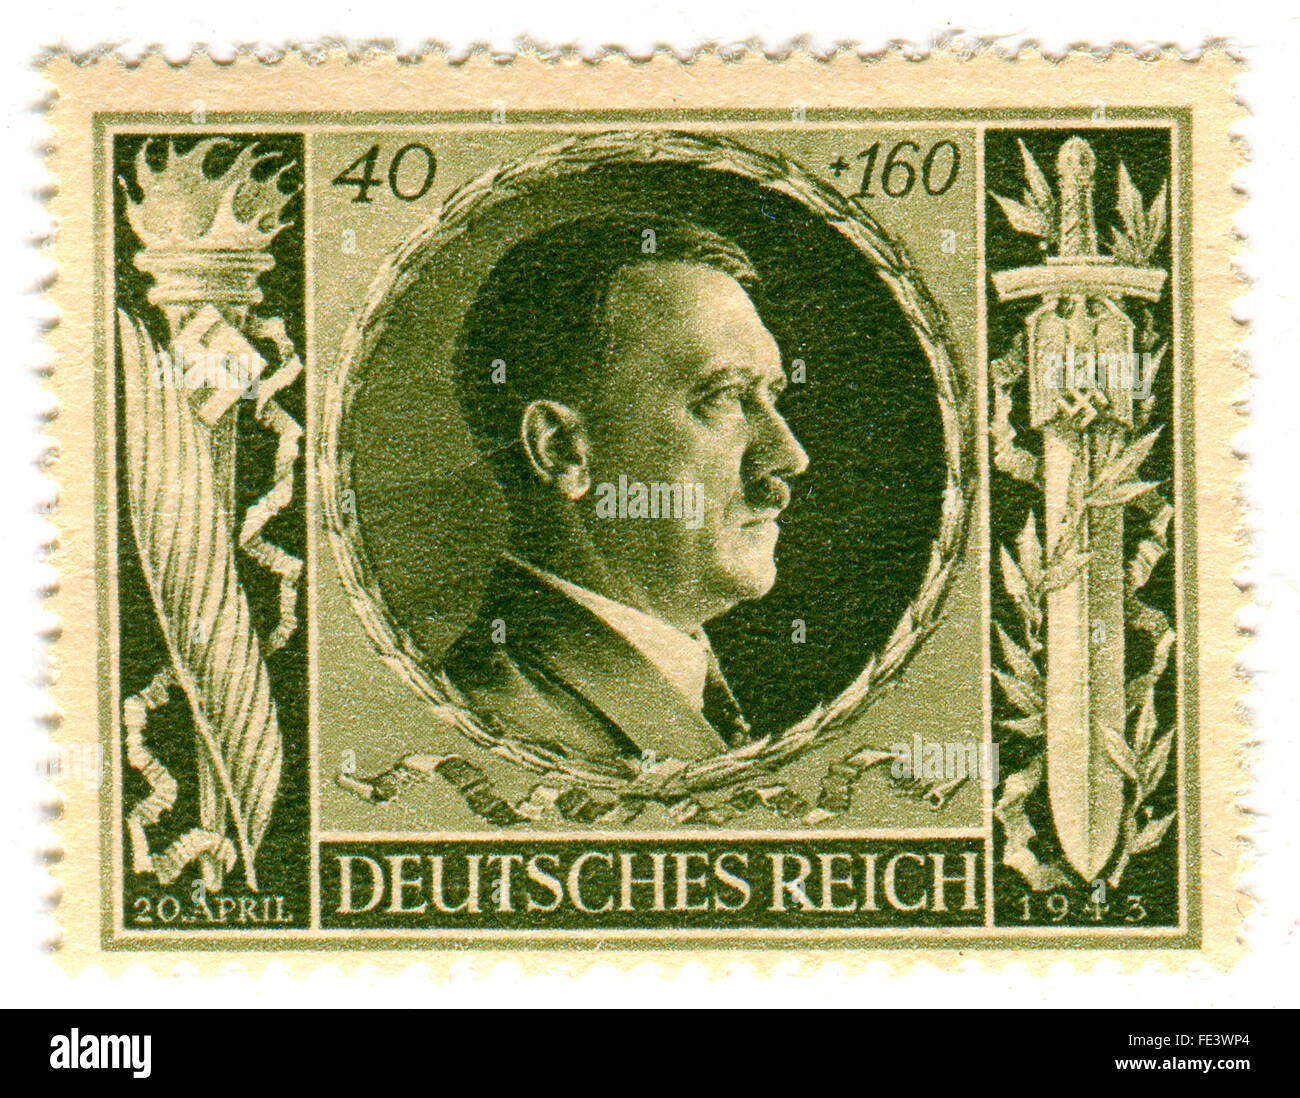 A stamp printed in Germany shows image of the Adolf Hitler (20 April 1889 - 30 April 1945). Stock Photo